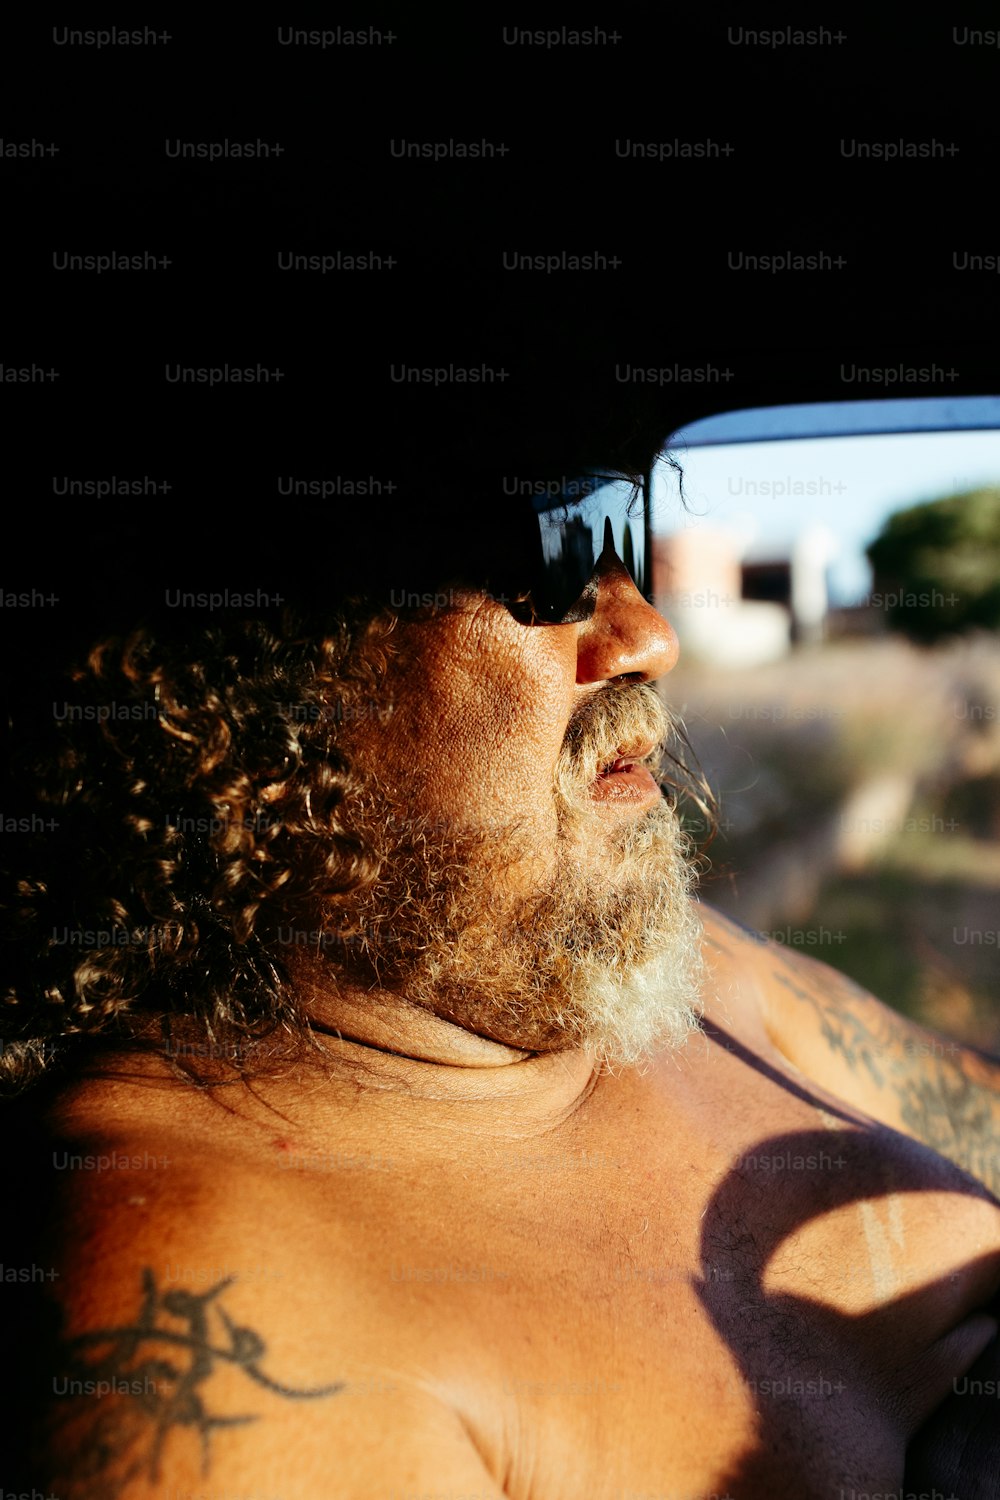 a man with long hair and a beard wearing sunglasses